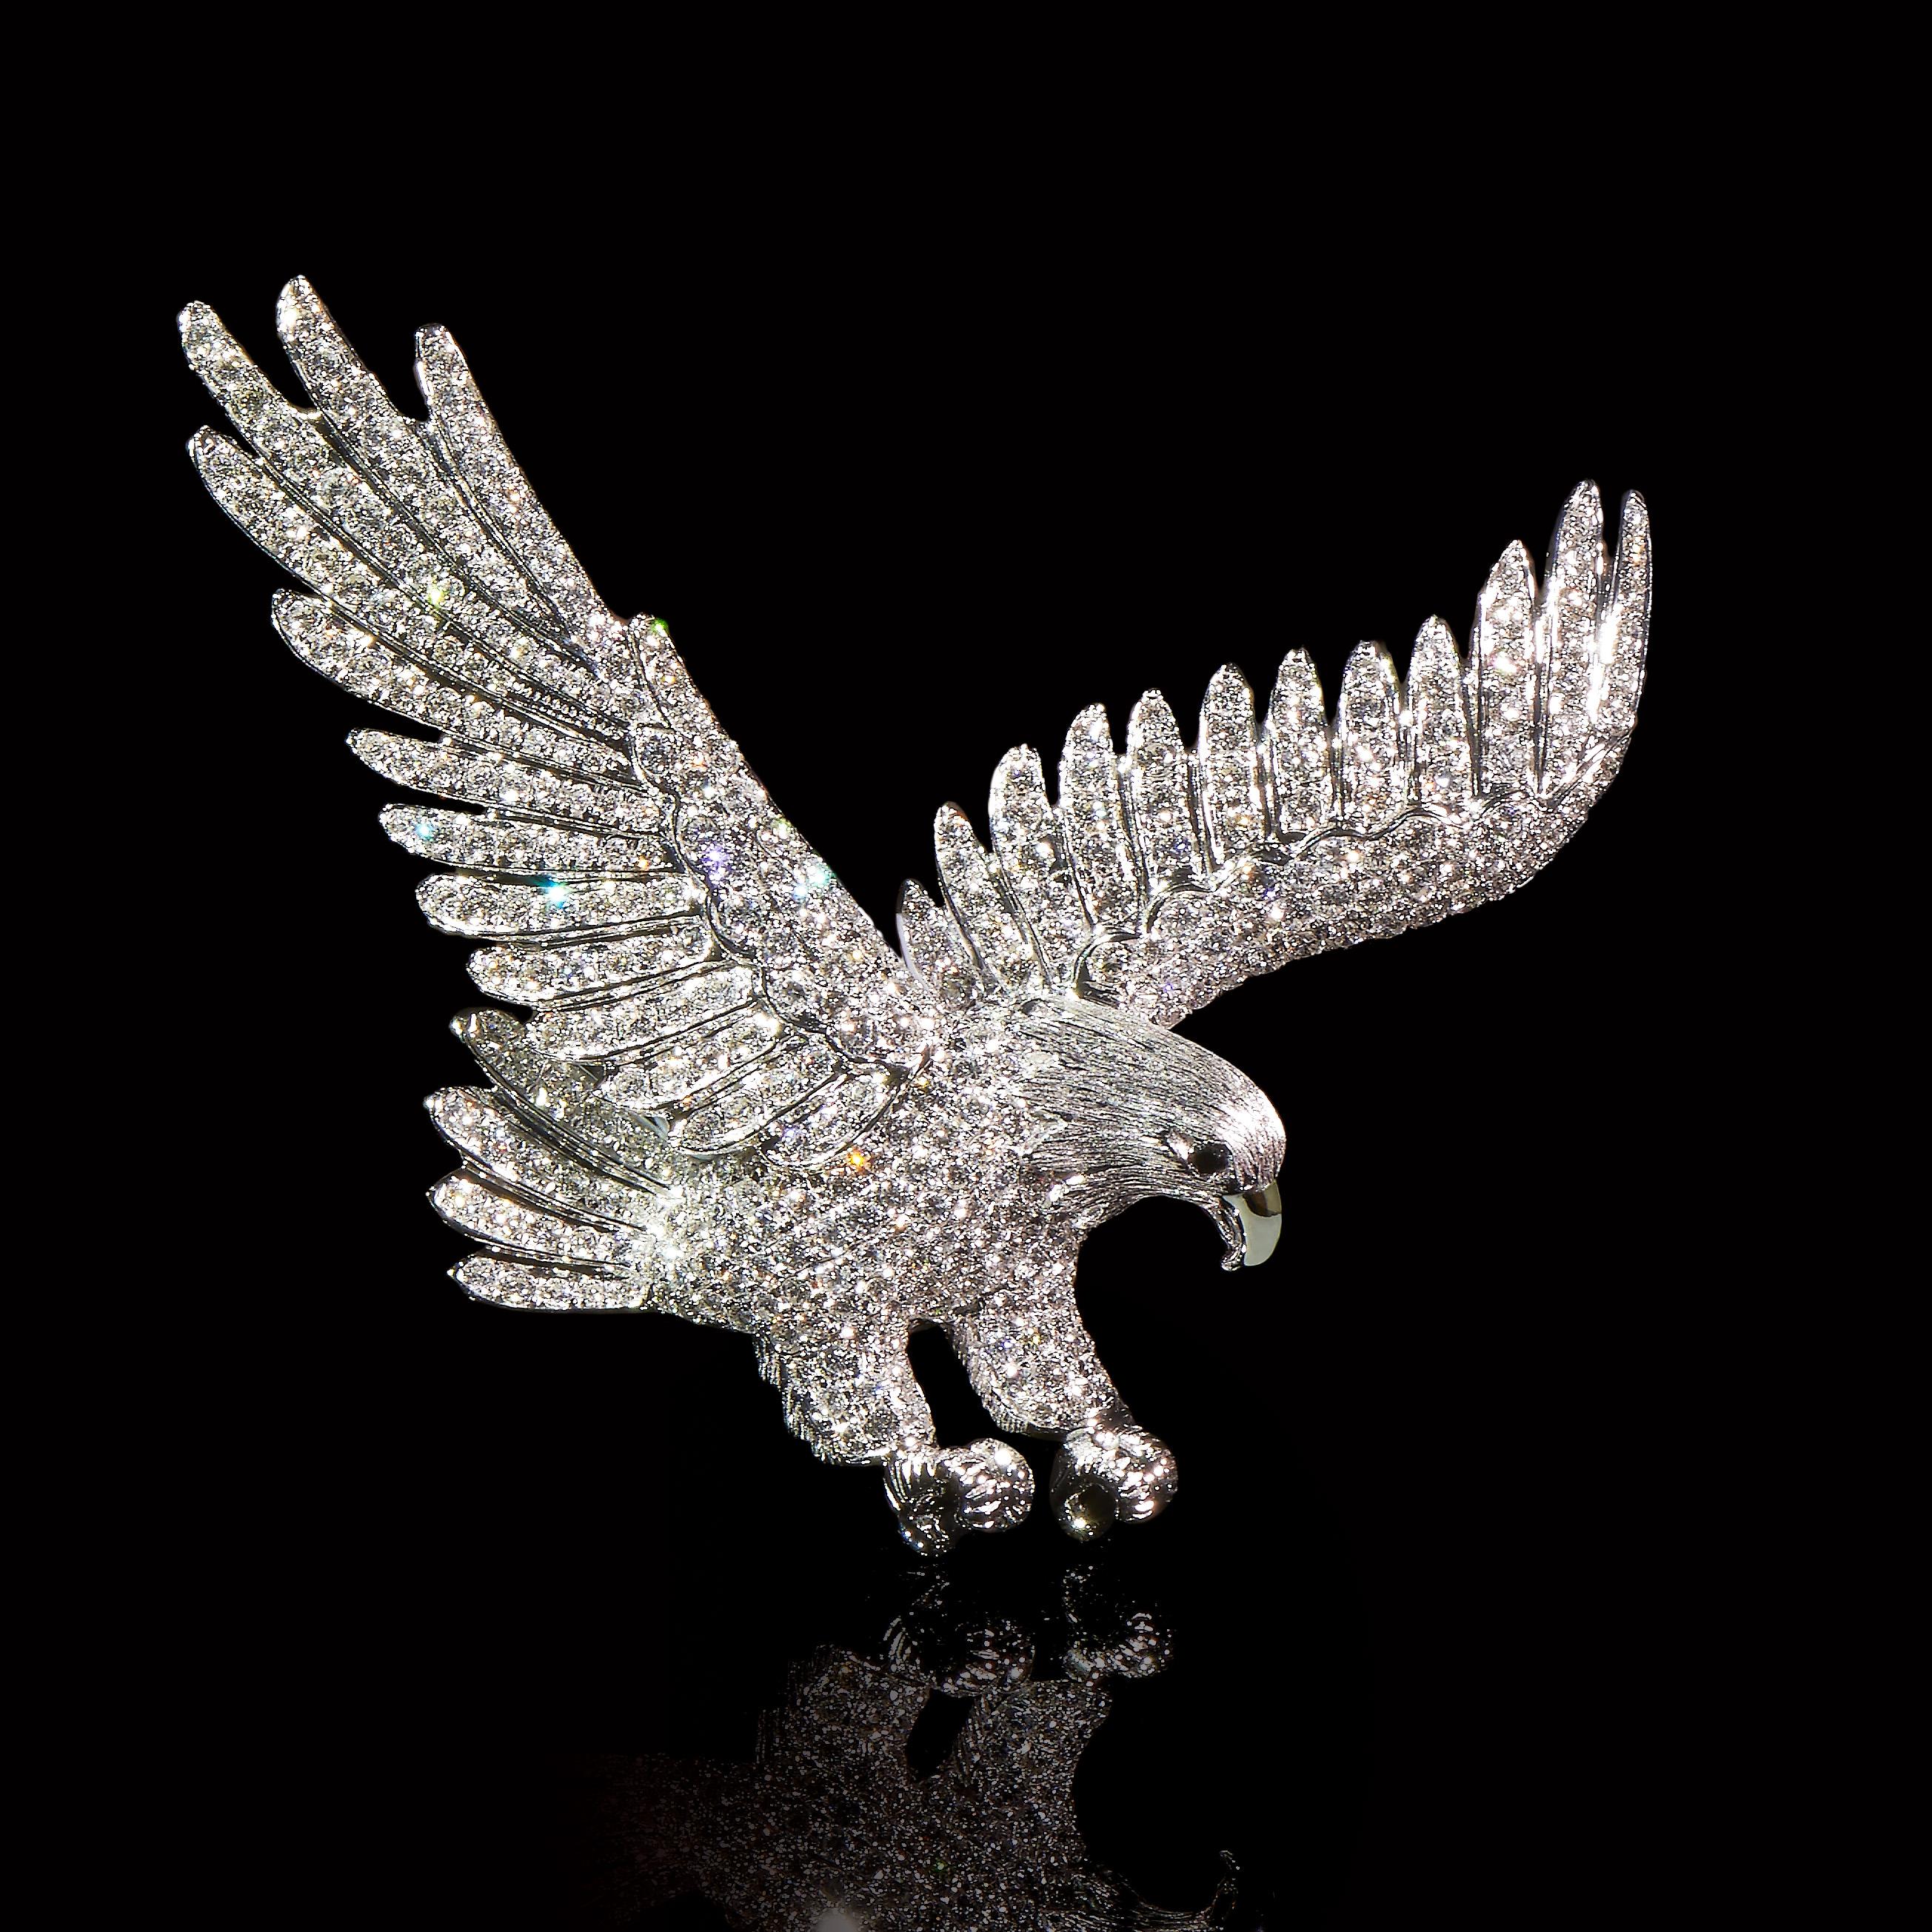 Dive  

2 Sapphires (0.026ct), 353 Diamonds (3.11cts), 18K White Gold.
Length: 55mm

An eagle with strong wings and legs diving down from mid-air, aims at its prey. Movement of the bird is captured in diamond and white gold.